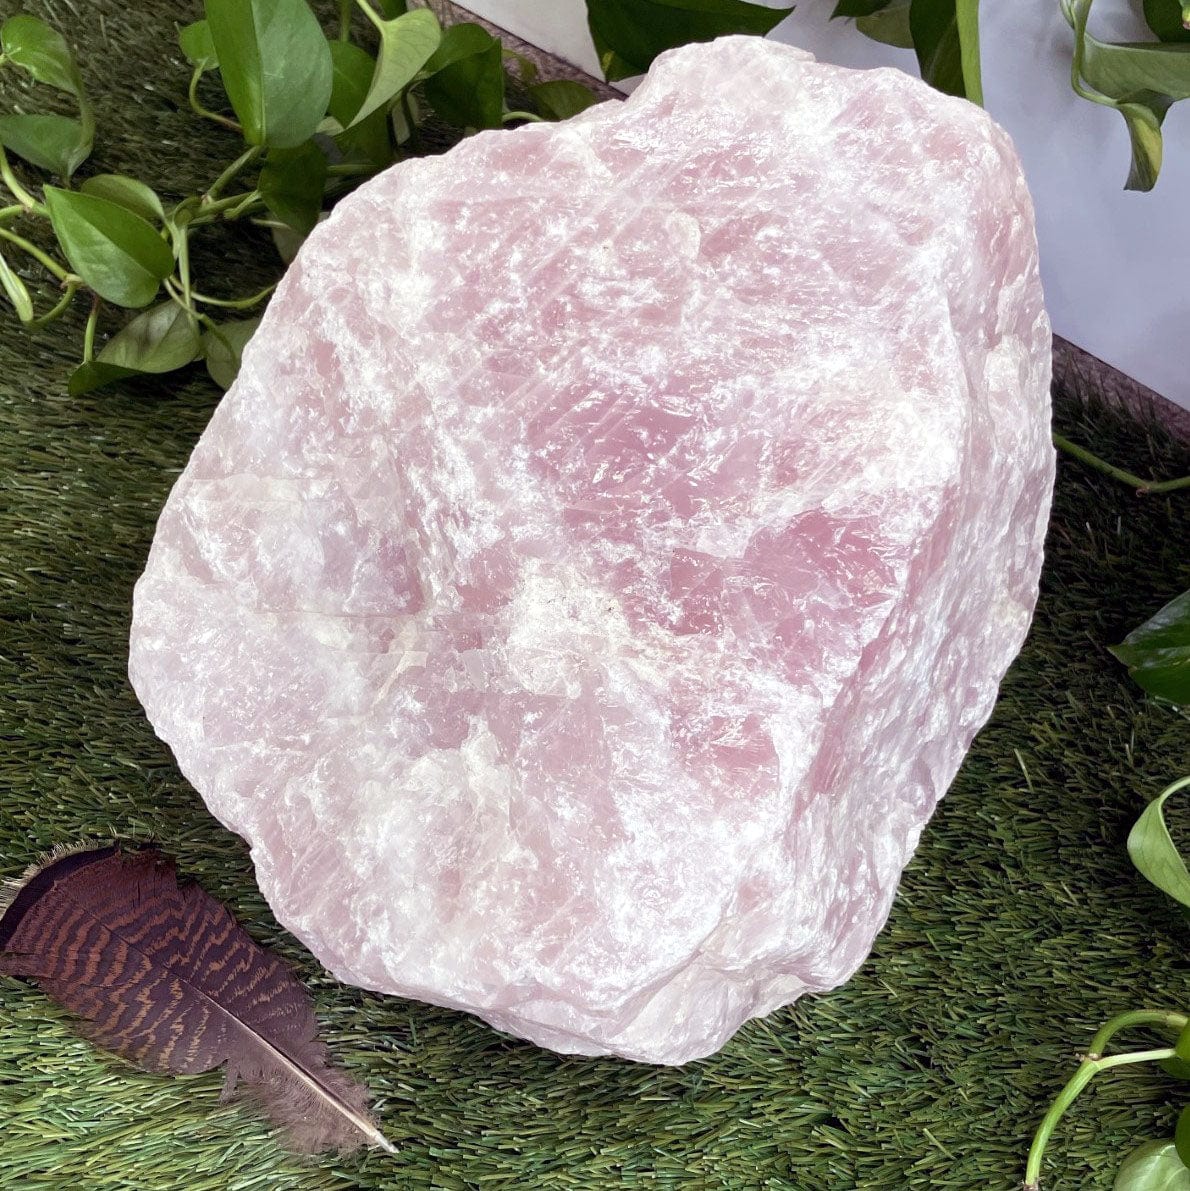 Large Giant Rose Quartz from another angle